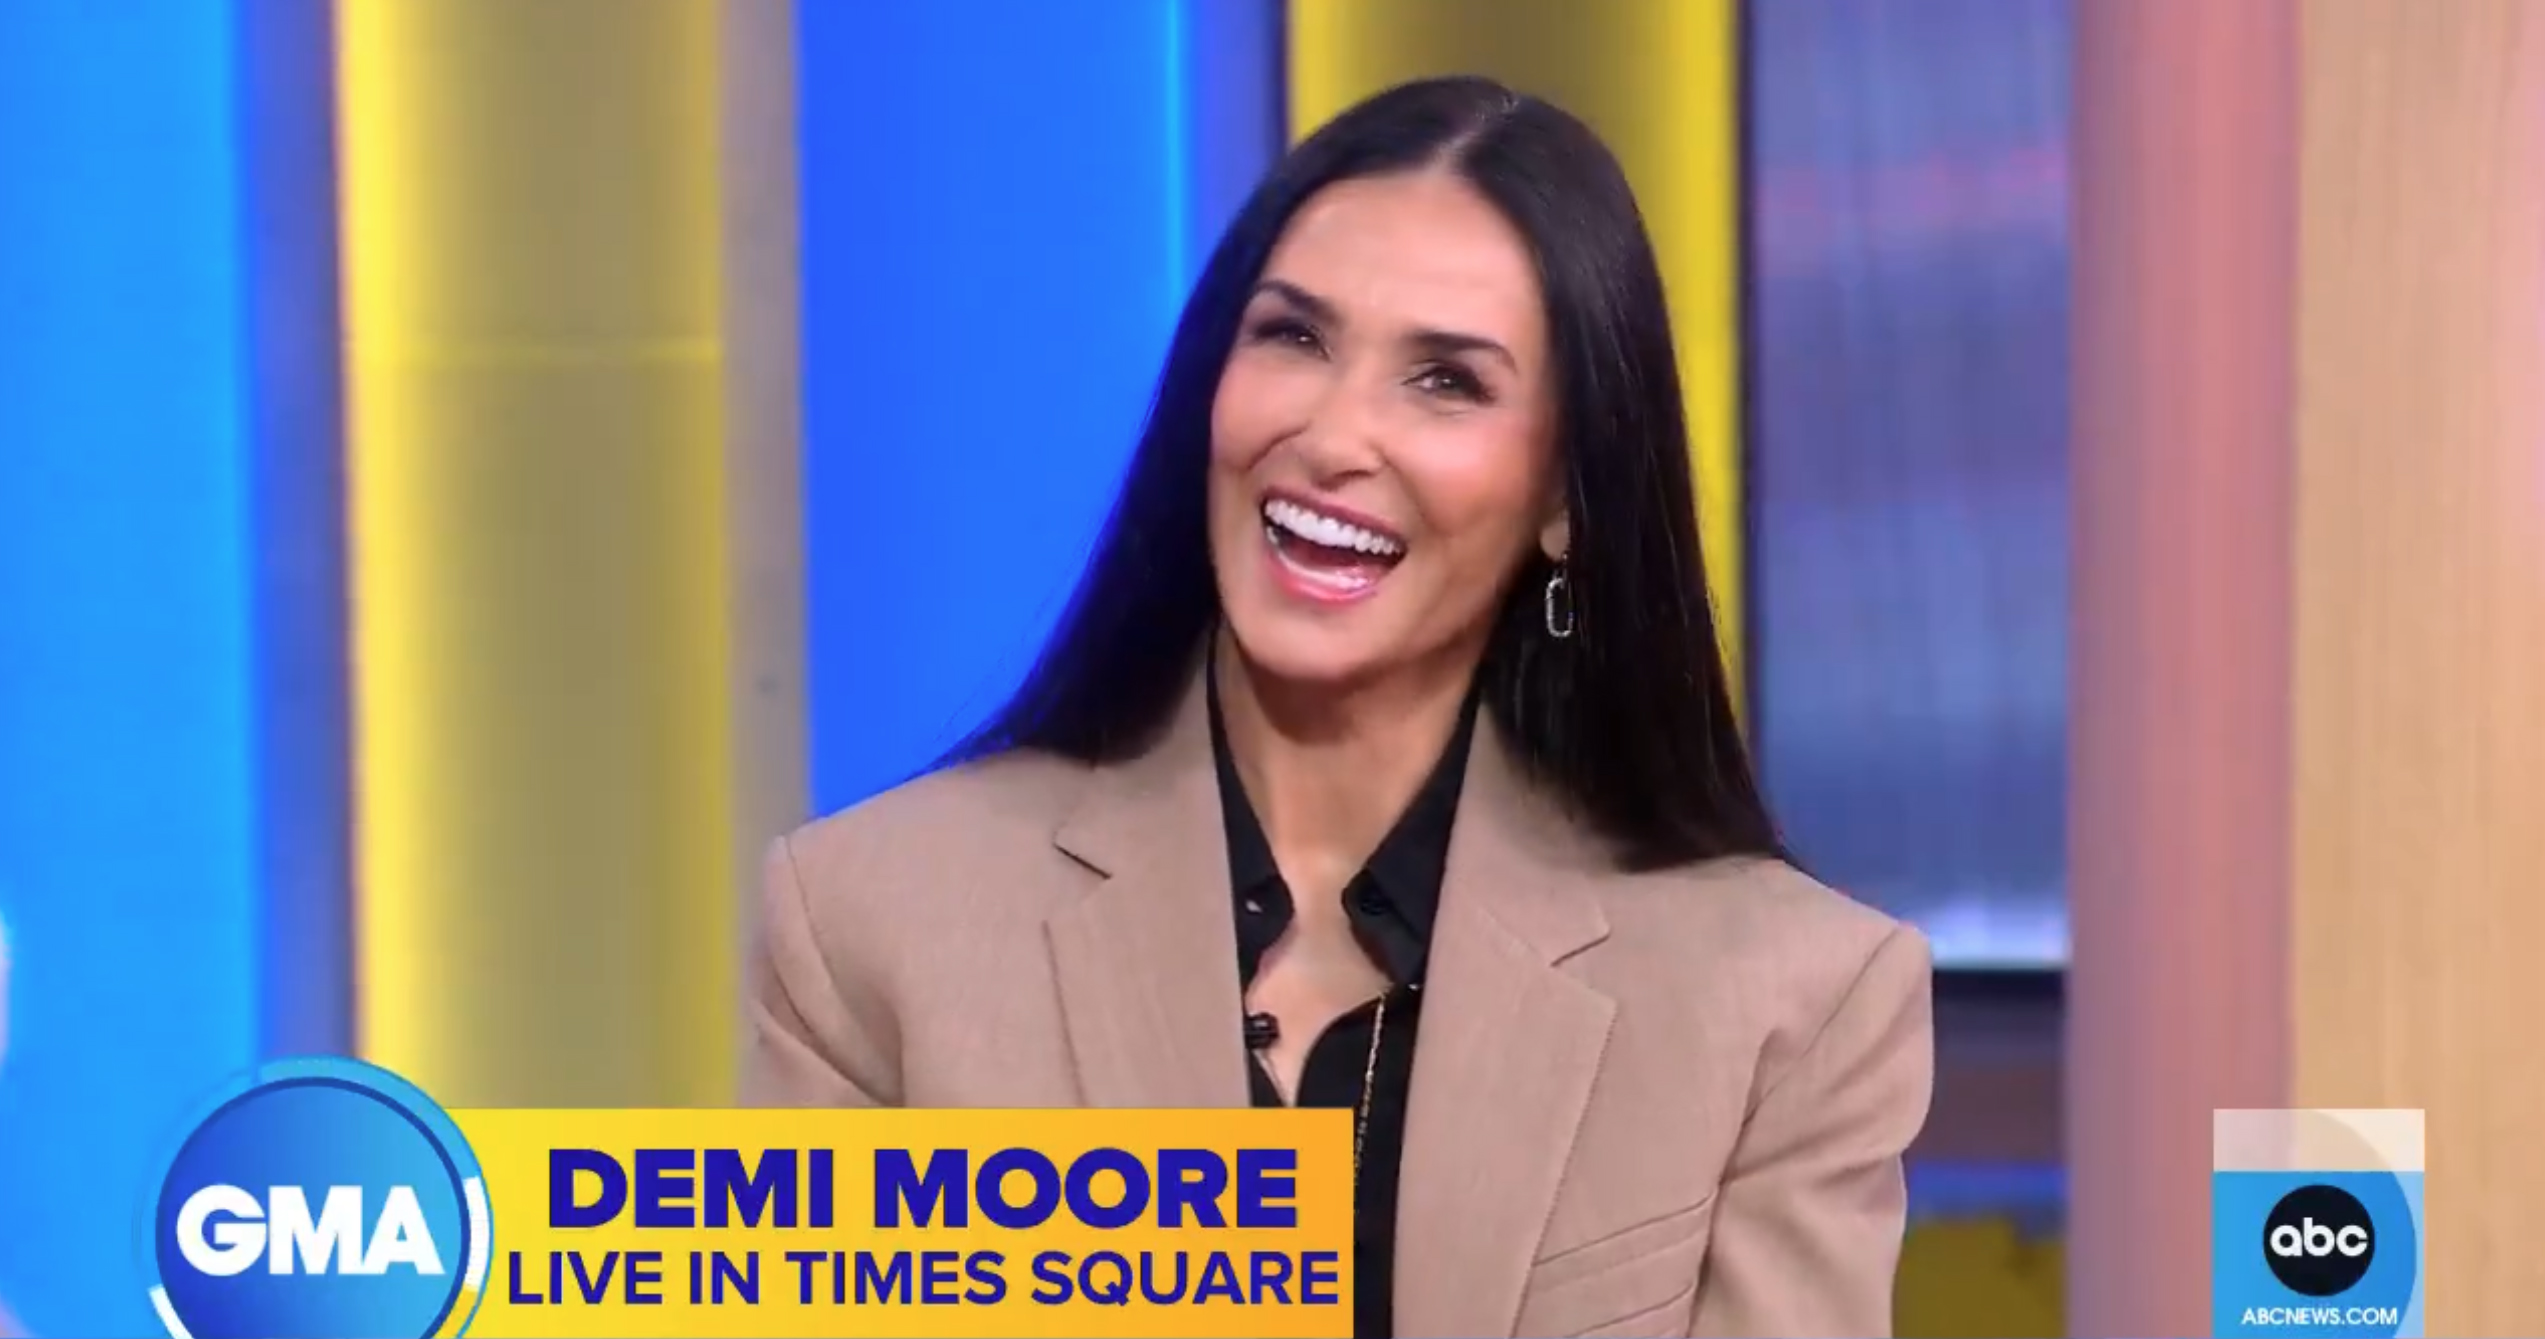 Demi Moore recently appeared on Good Morning America